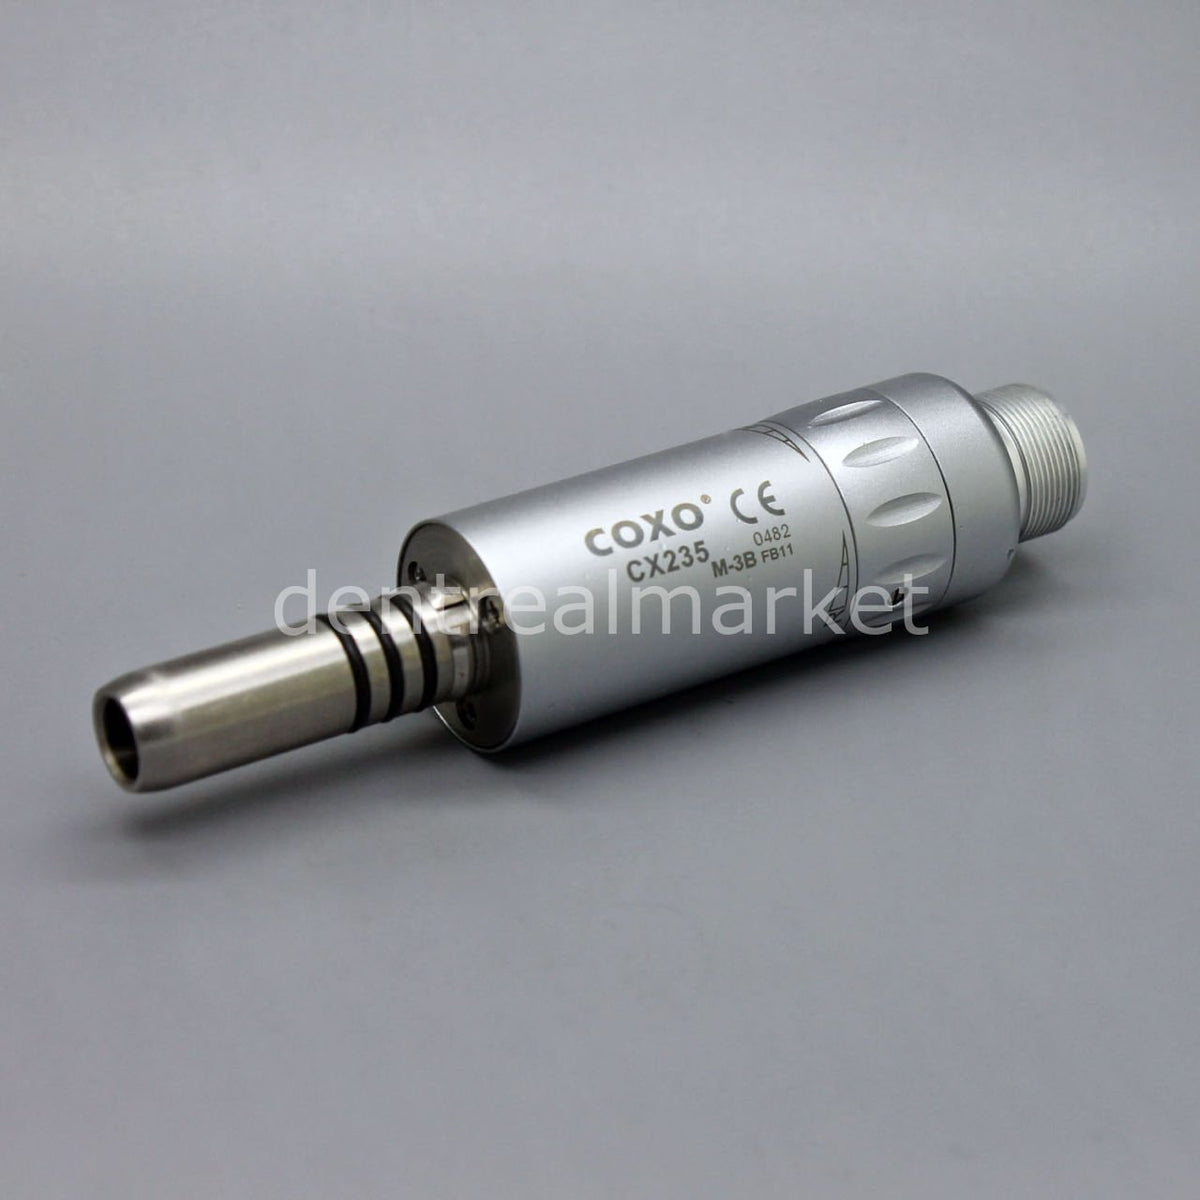 DentrealStore - Coxo Air Micromotor with Internal Water